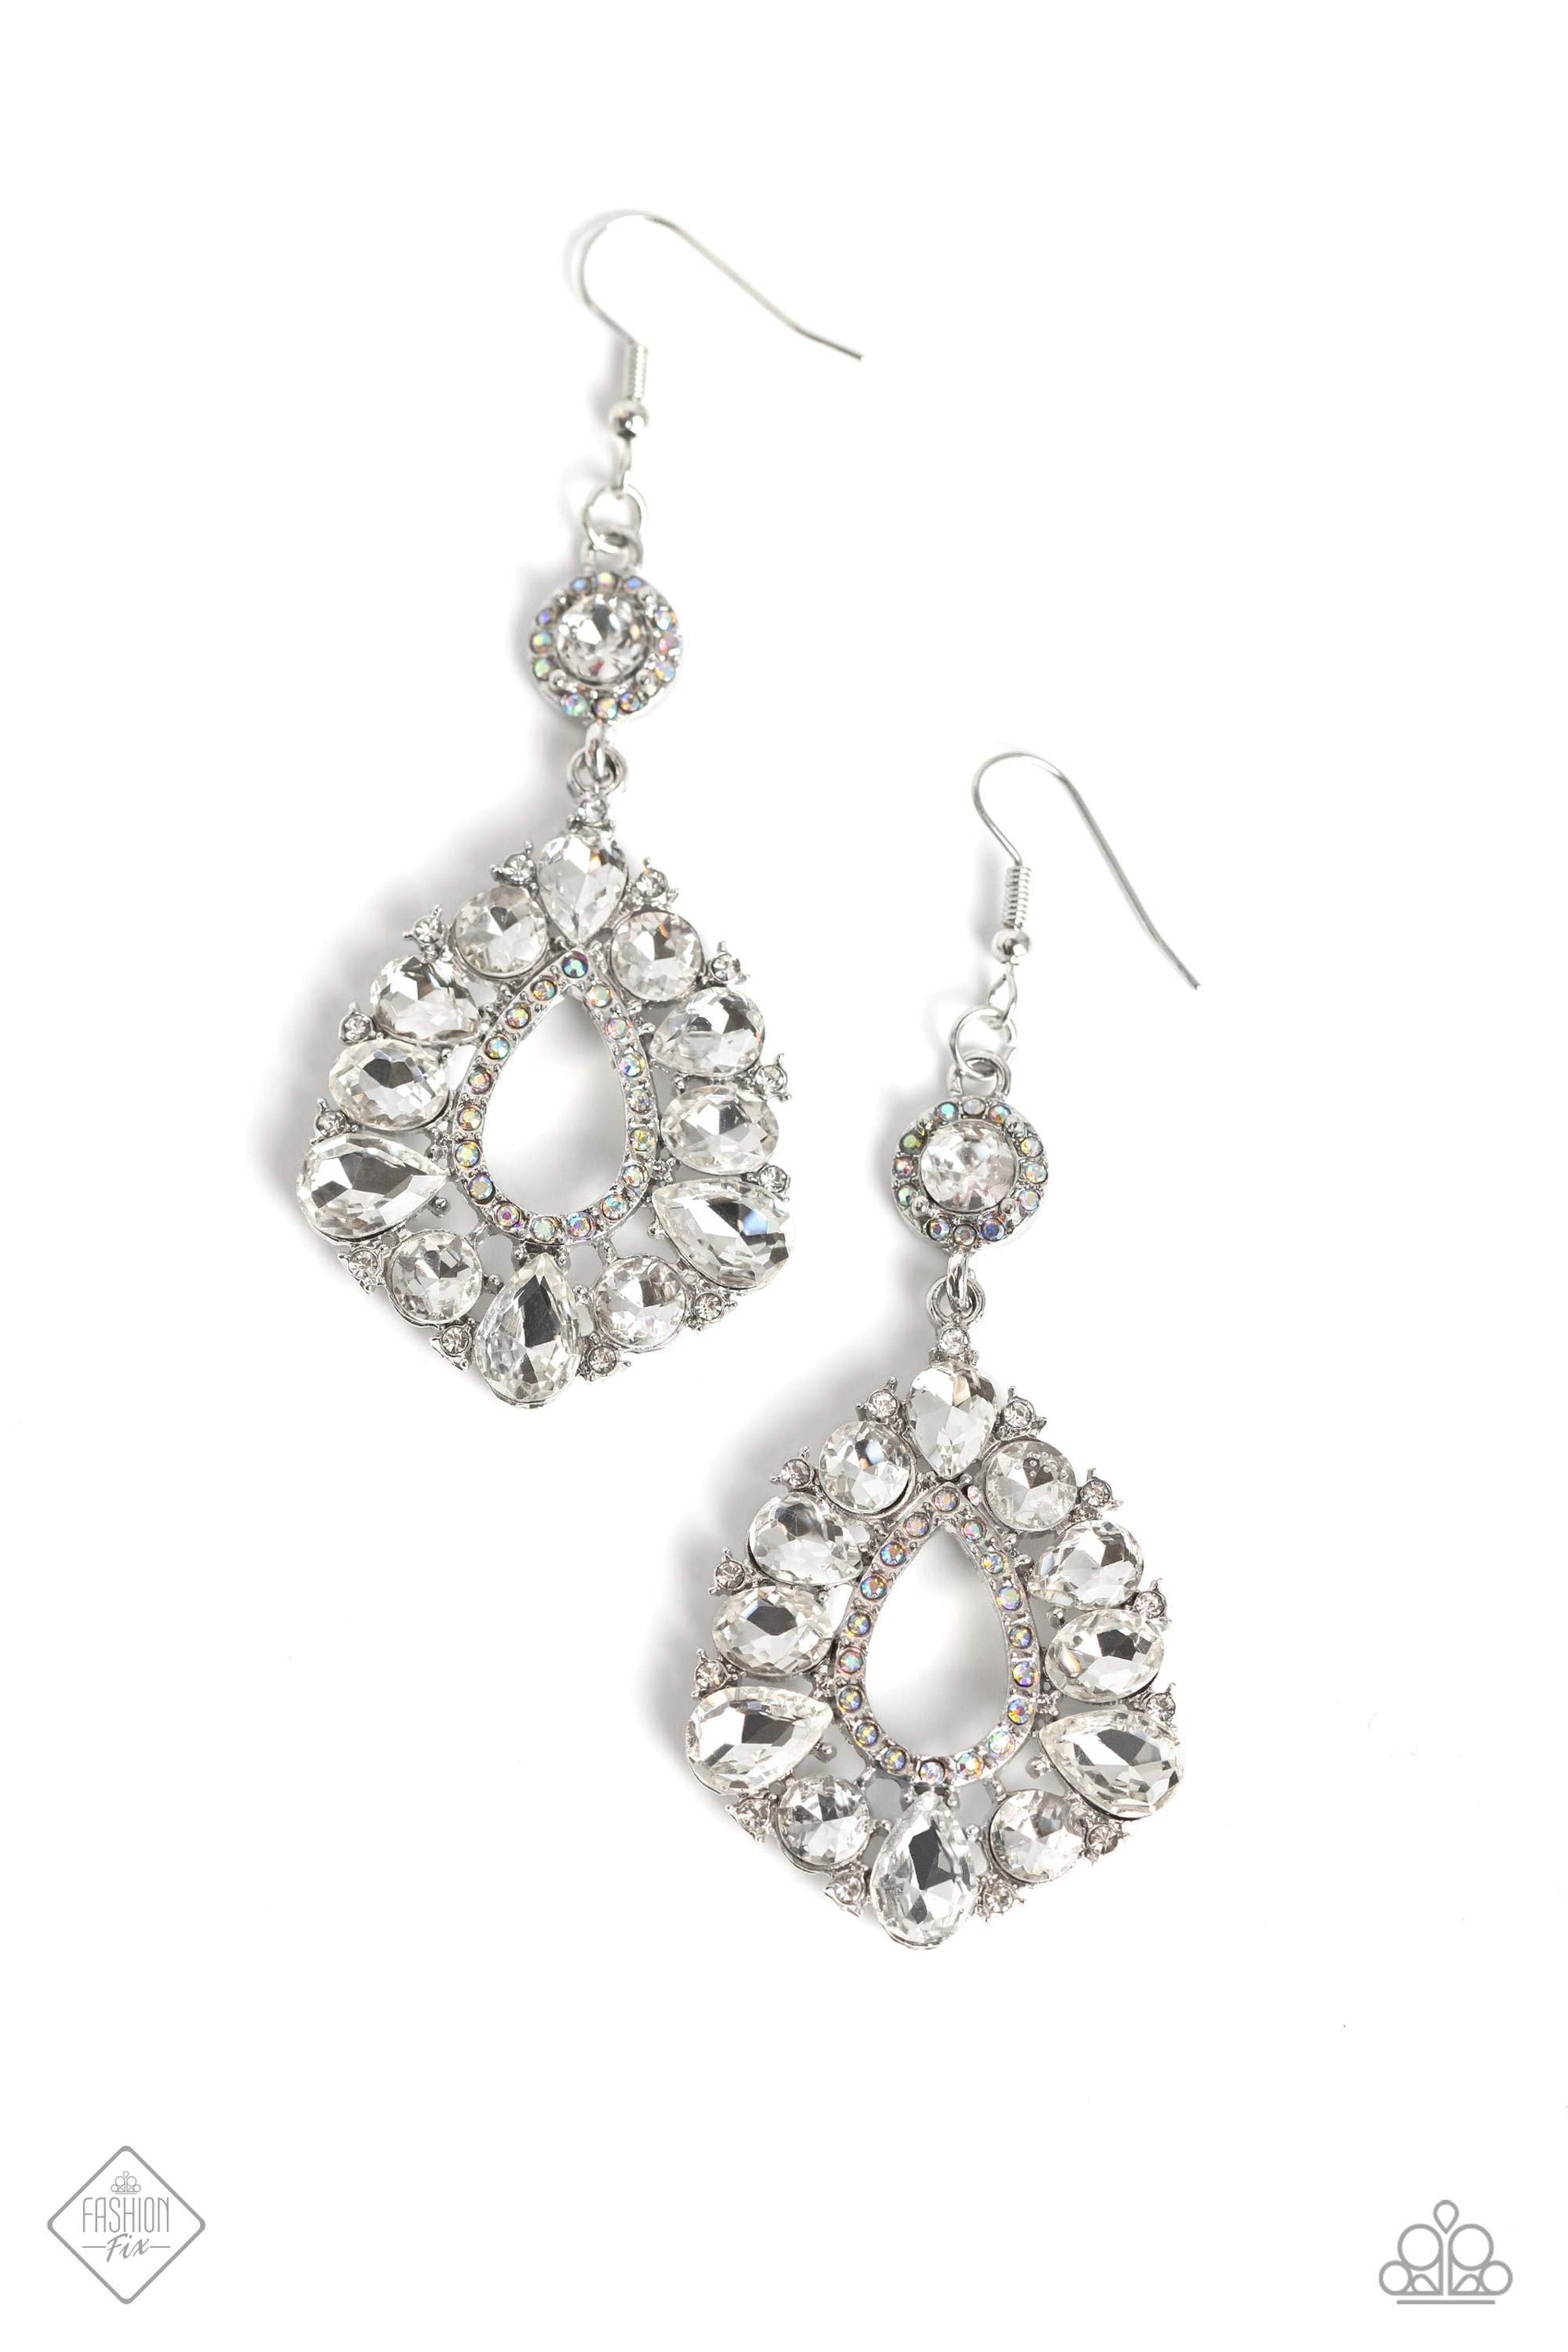 Happily Ever Exquisite - White and Silver Earrings - Paparazzi Accessories - Dotted with dainty iridescent rhinestones and encircled in a border of white teardrop and round gems, an enchanting teardrop frame swings from the bottom of a smaller round frame, featuring a white gem center and the same shimmery iridescent rhinestone border, creating a whimsically stacked lure.